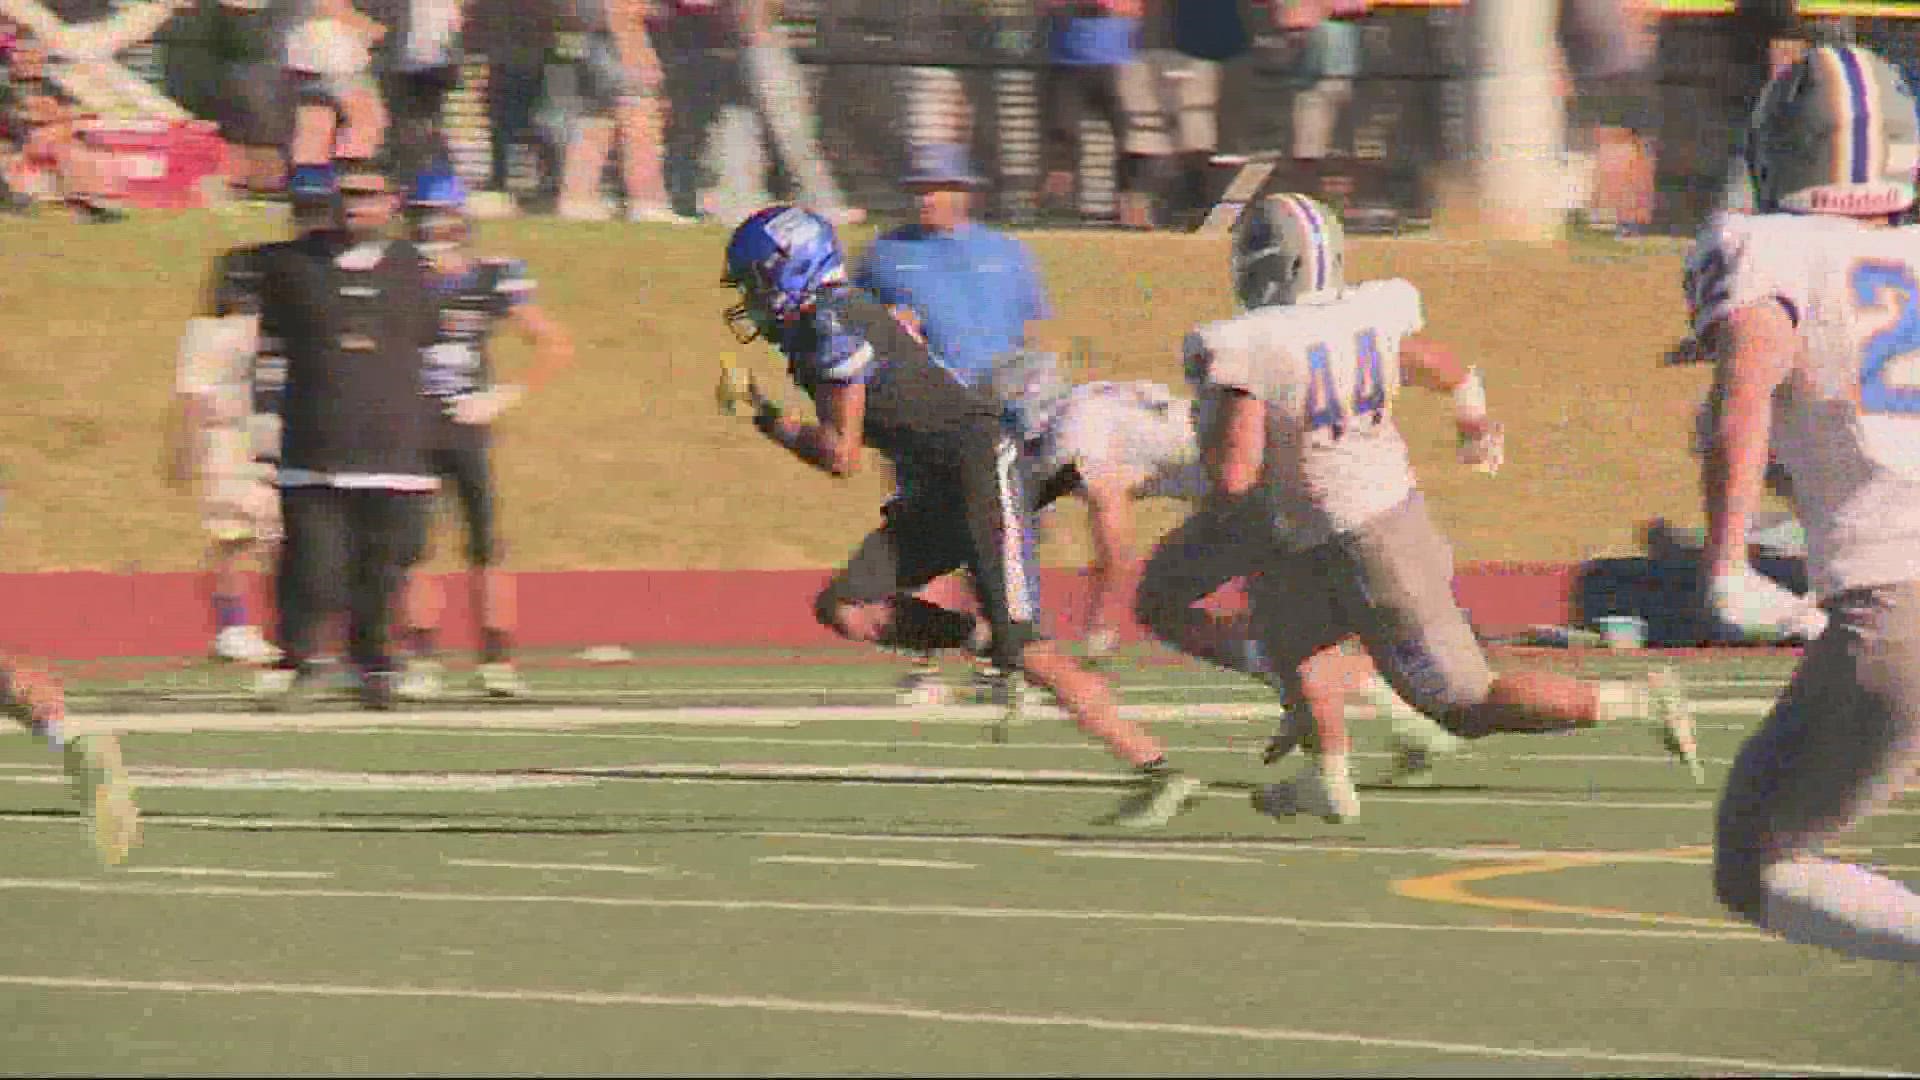 It came down to the wire in this game and Newberg opened the season defeating Grant 28-27.